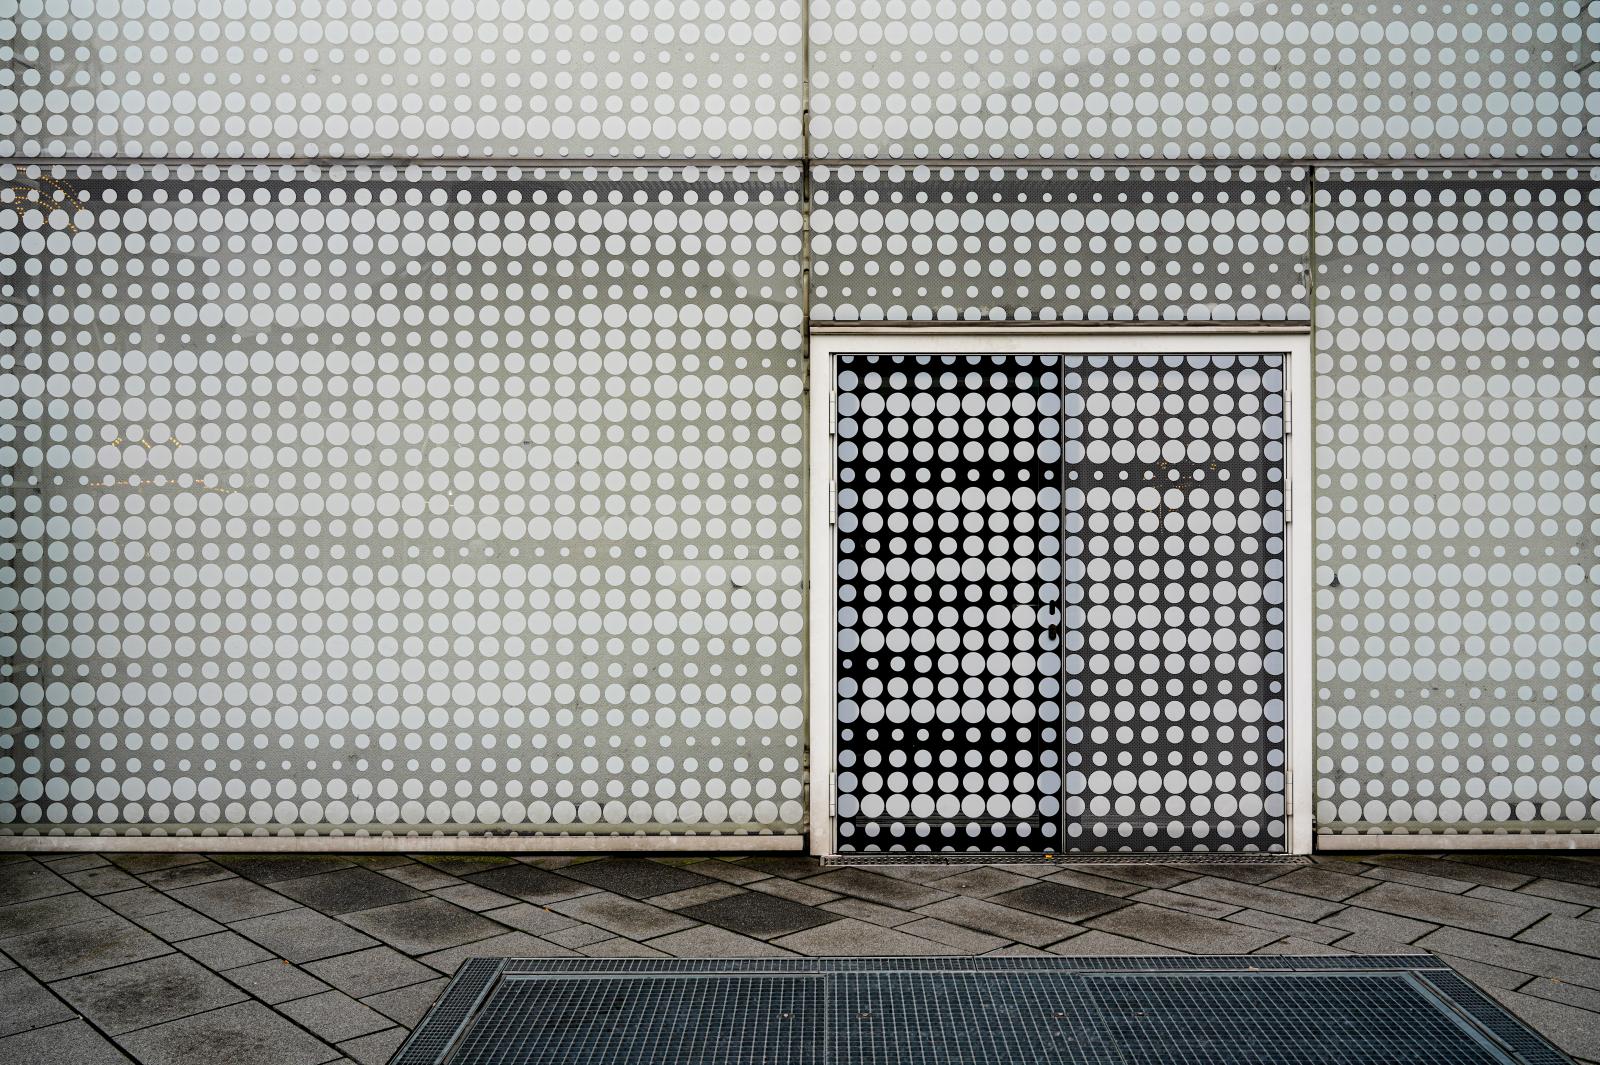 Polka Dots and Perspectives: The Forum Confluentes | Buy this image